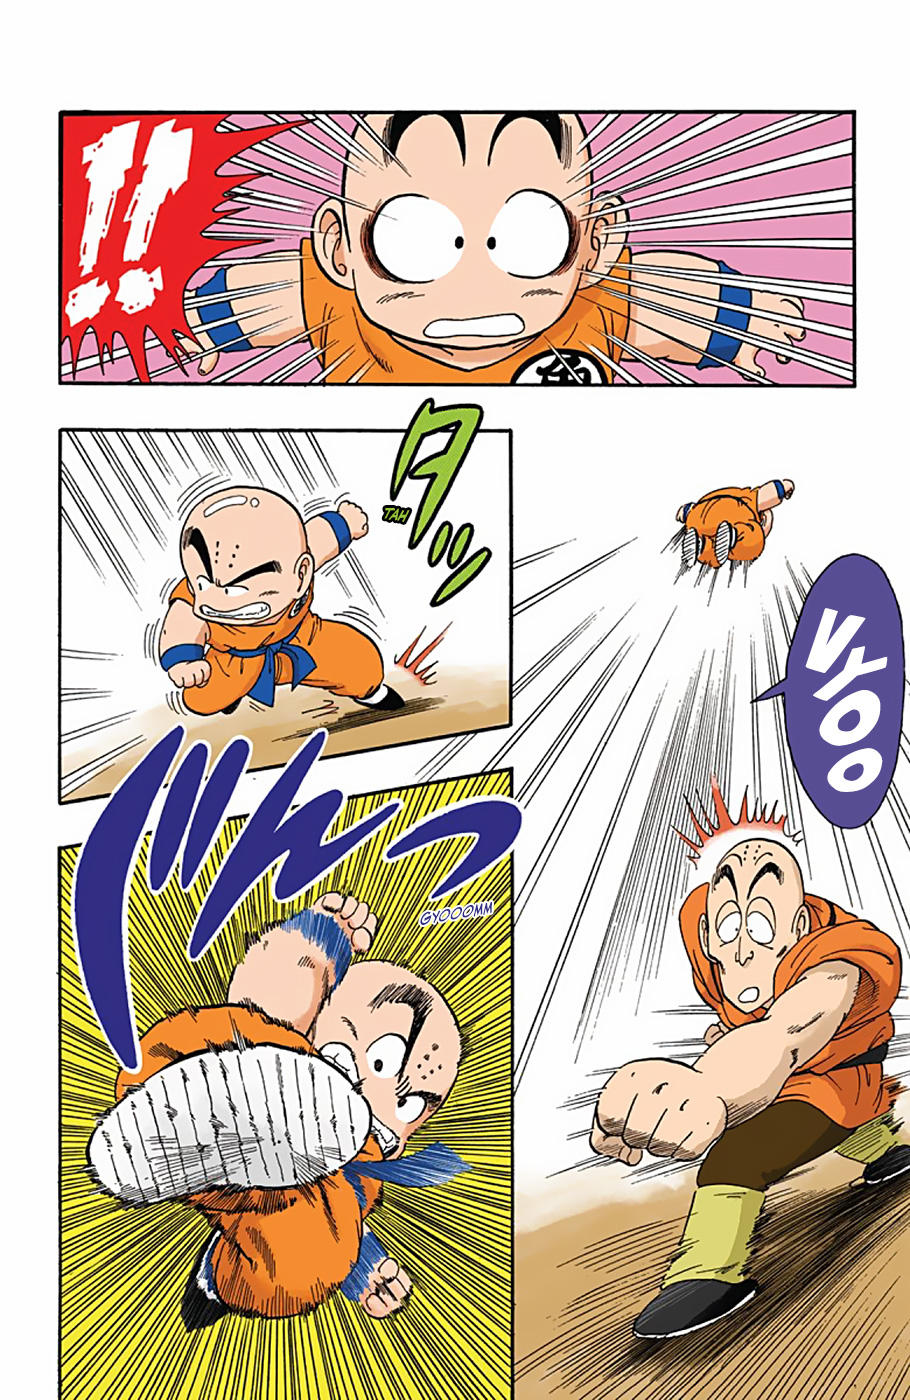 Dragon Ball - Full Color Edition Vol.3 Chapter 33: The Power Of Training!! page 16 - Mangakakalot